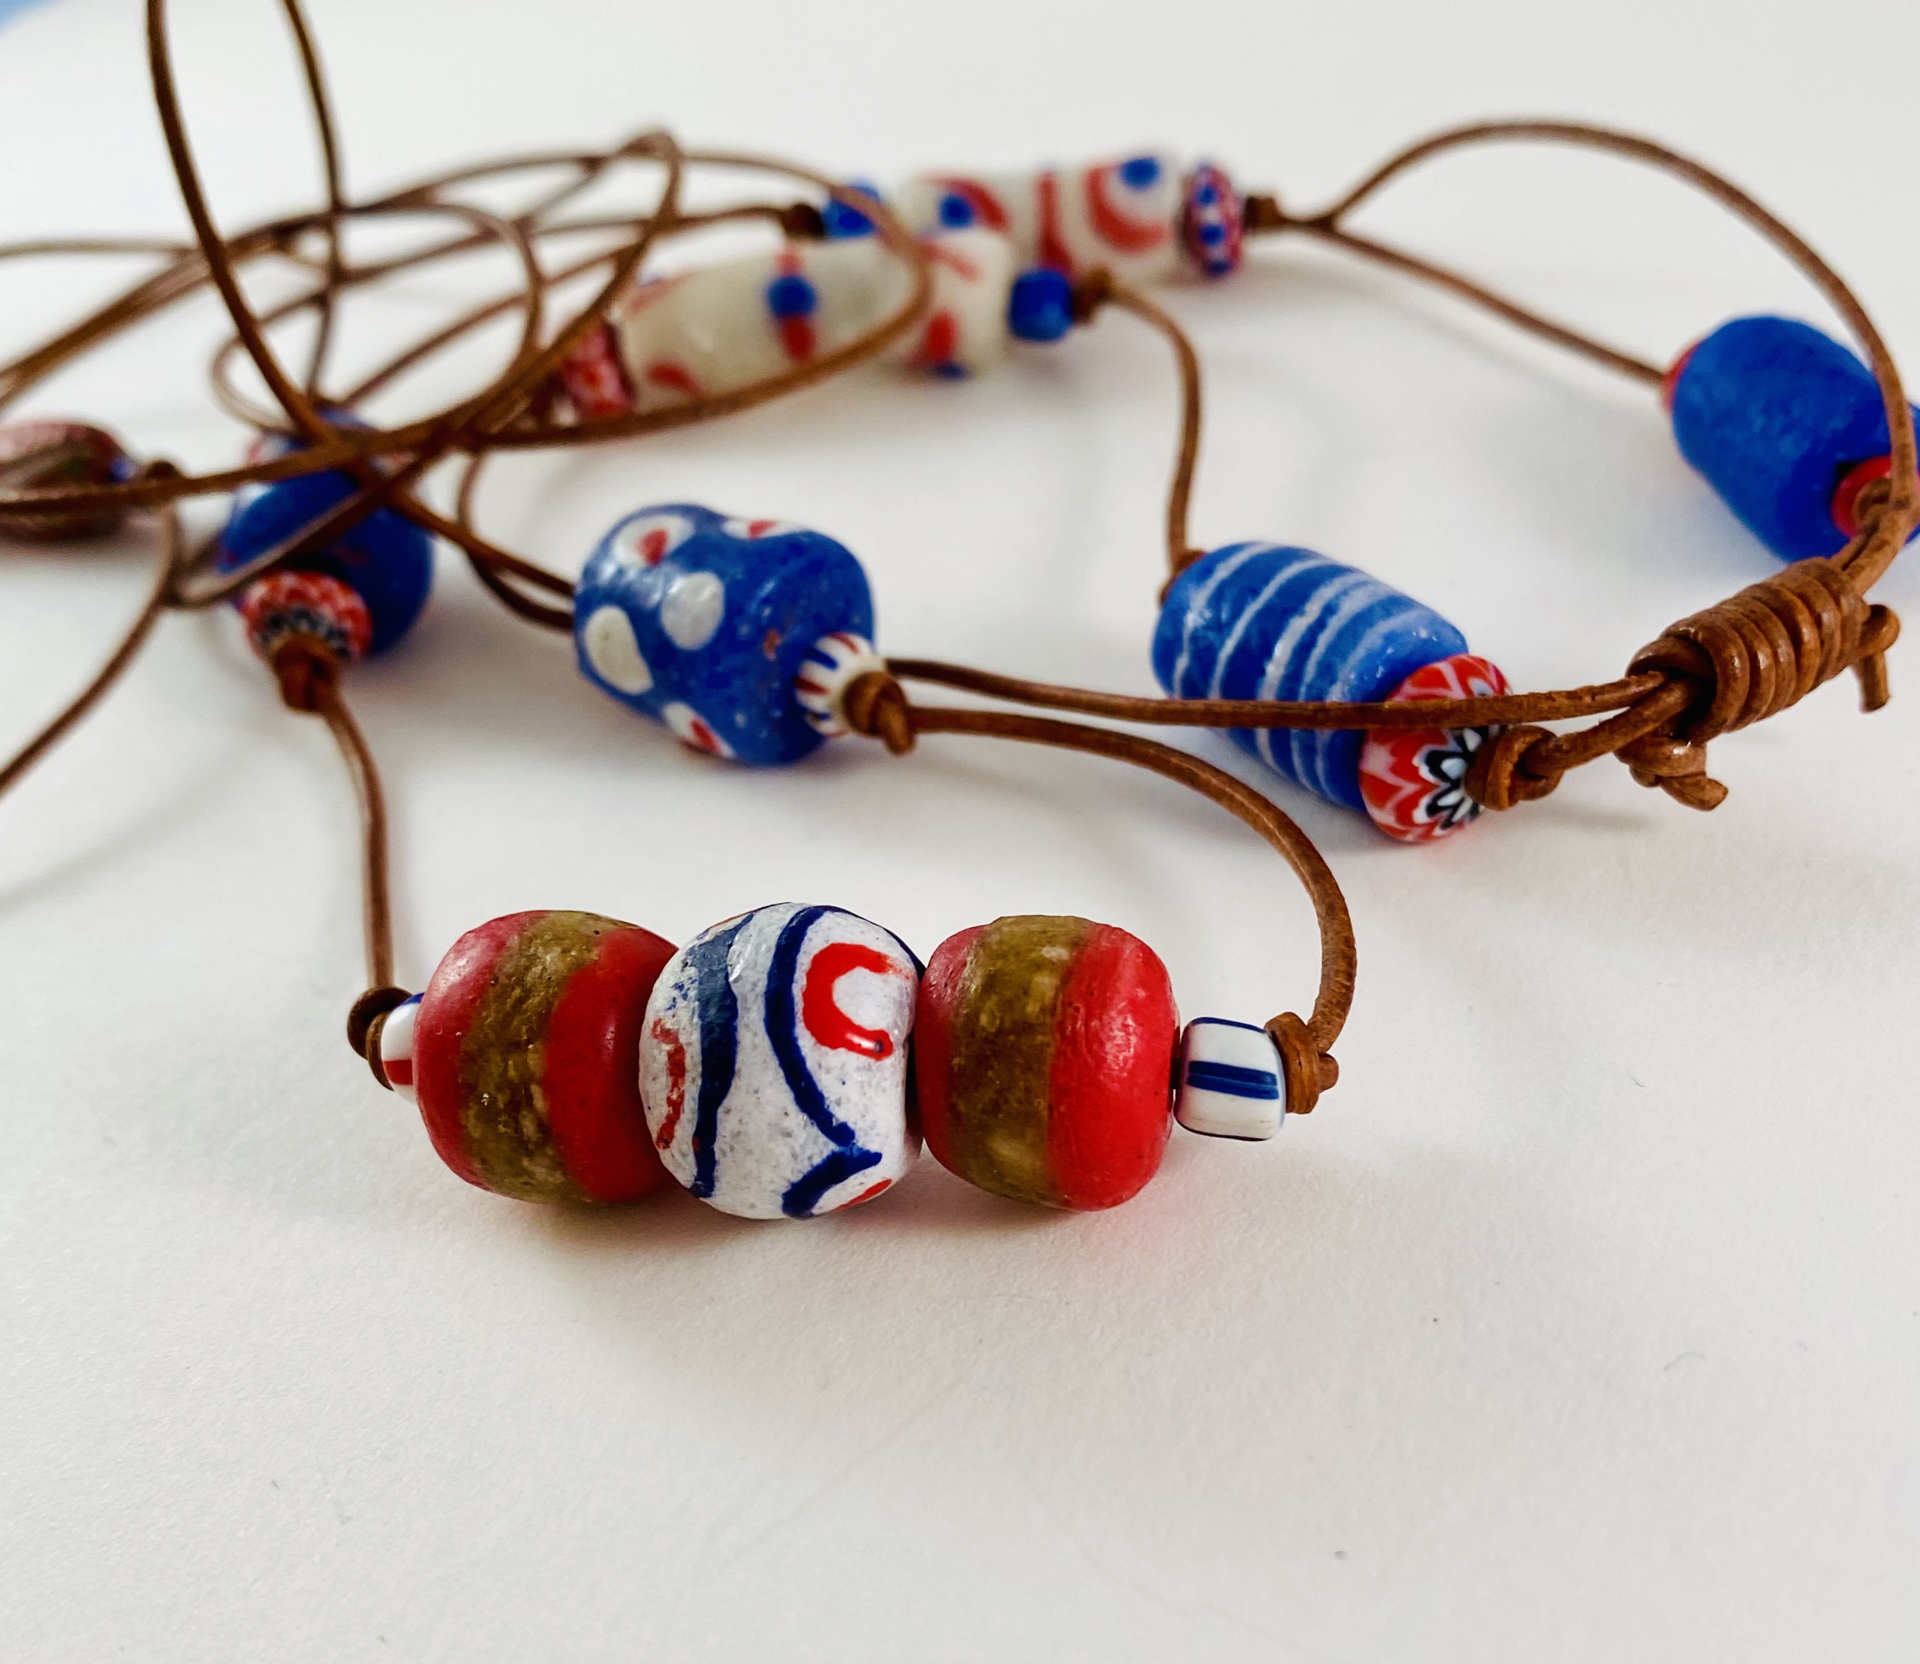 African Trade Bead Lariat Necklace by Barbara Duimstra